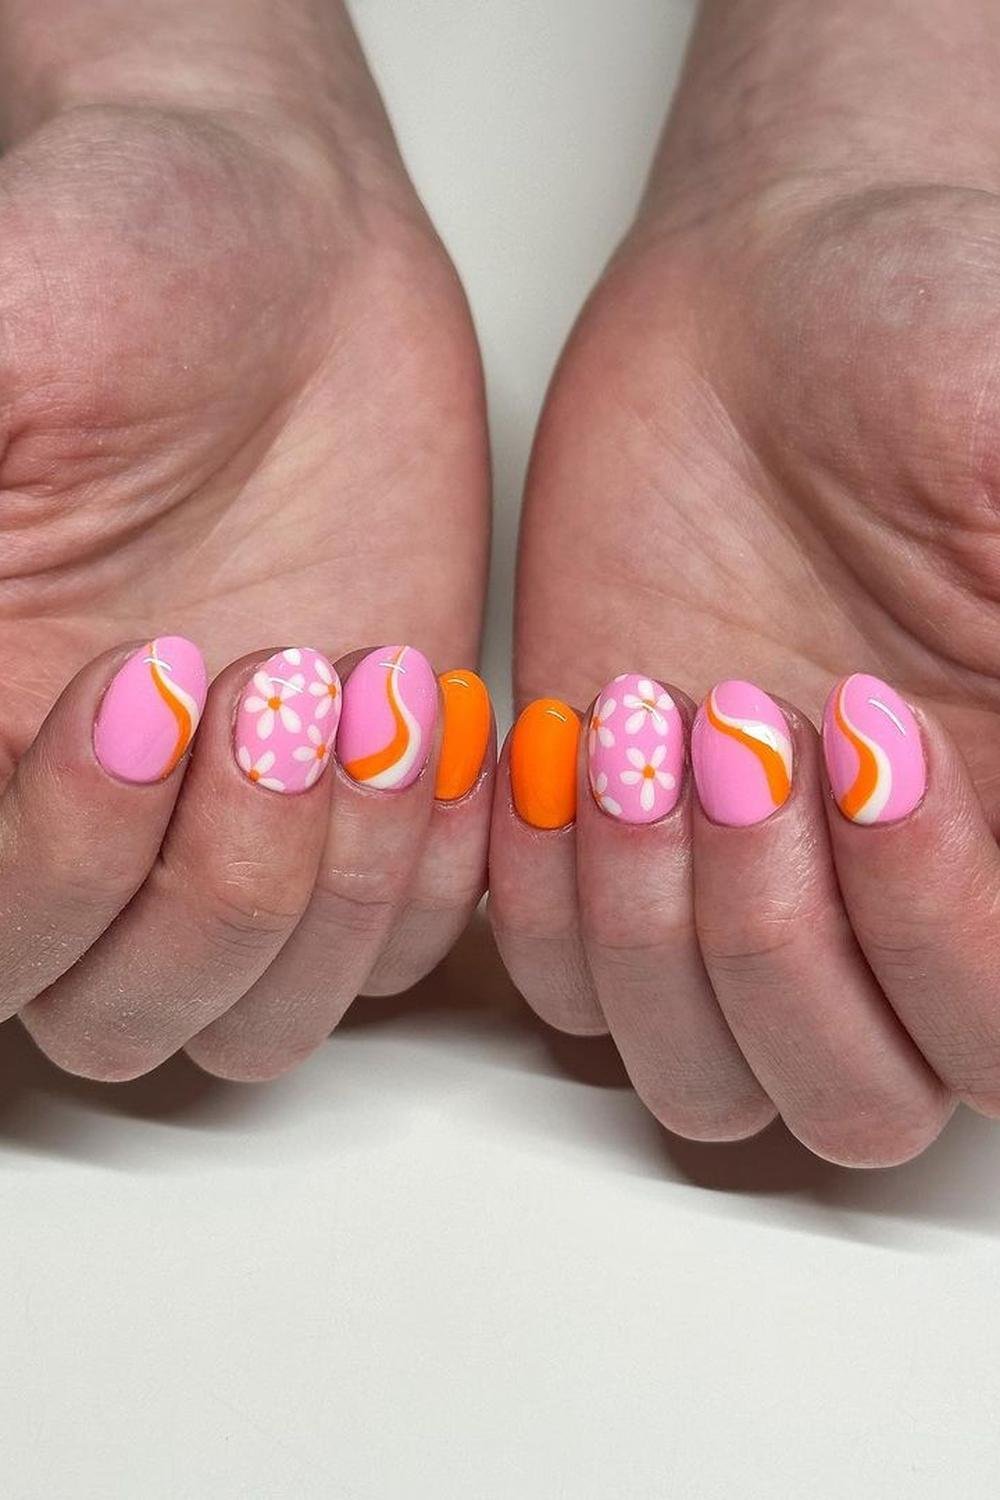 18 - Picture of Pink and Orange Nails